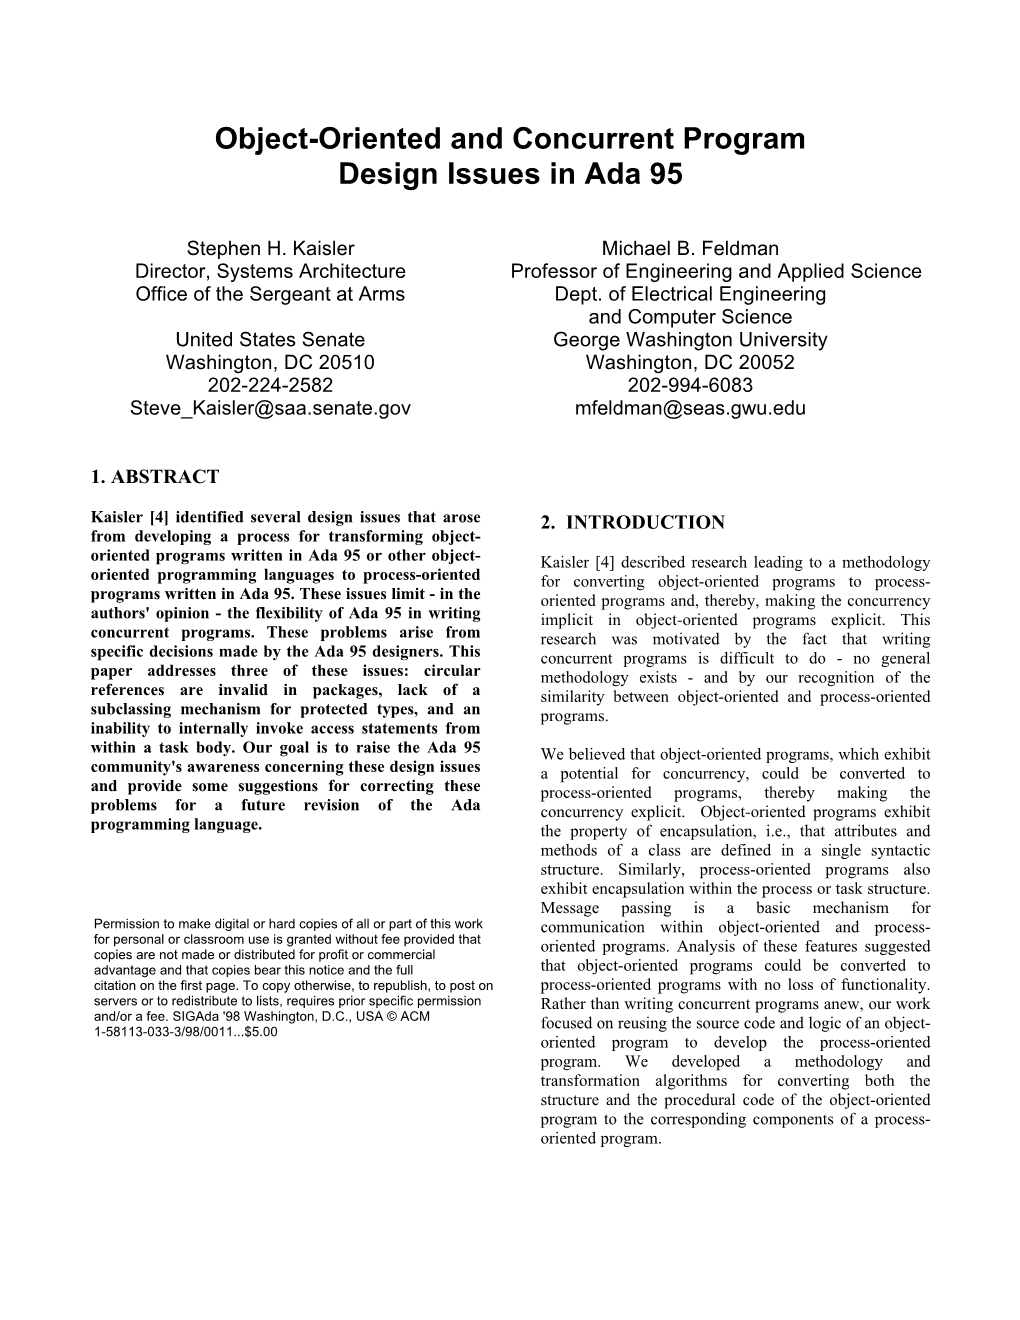 Object-Oriented and Concurrent Program Design Issues in Ada 95